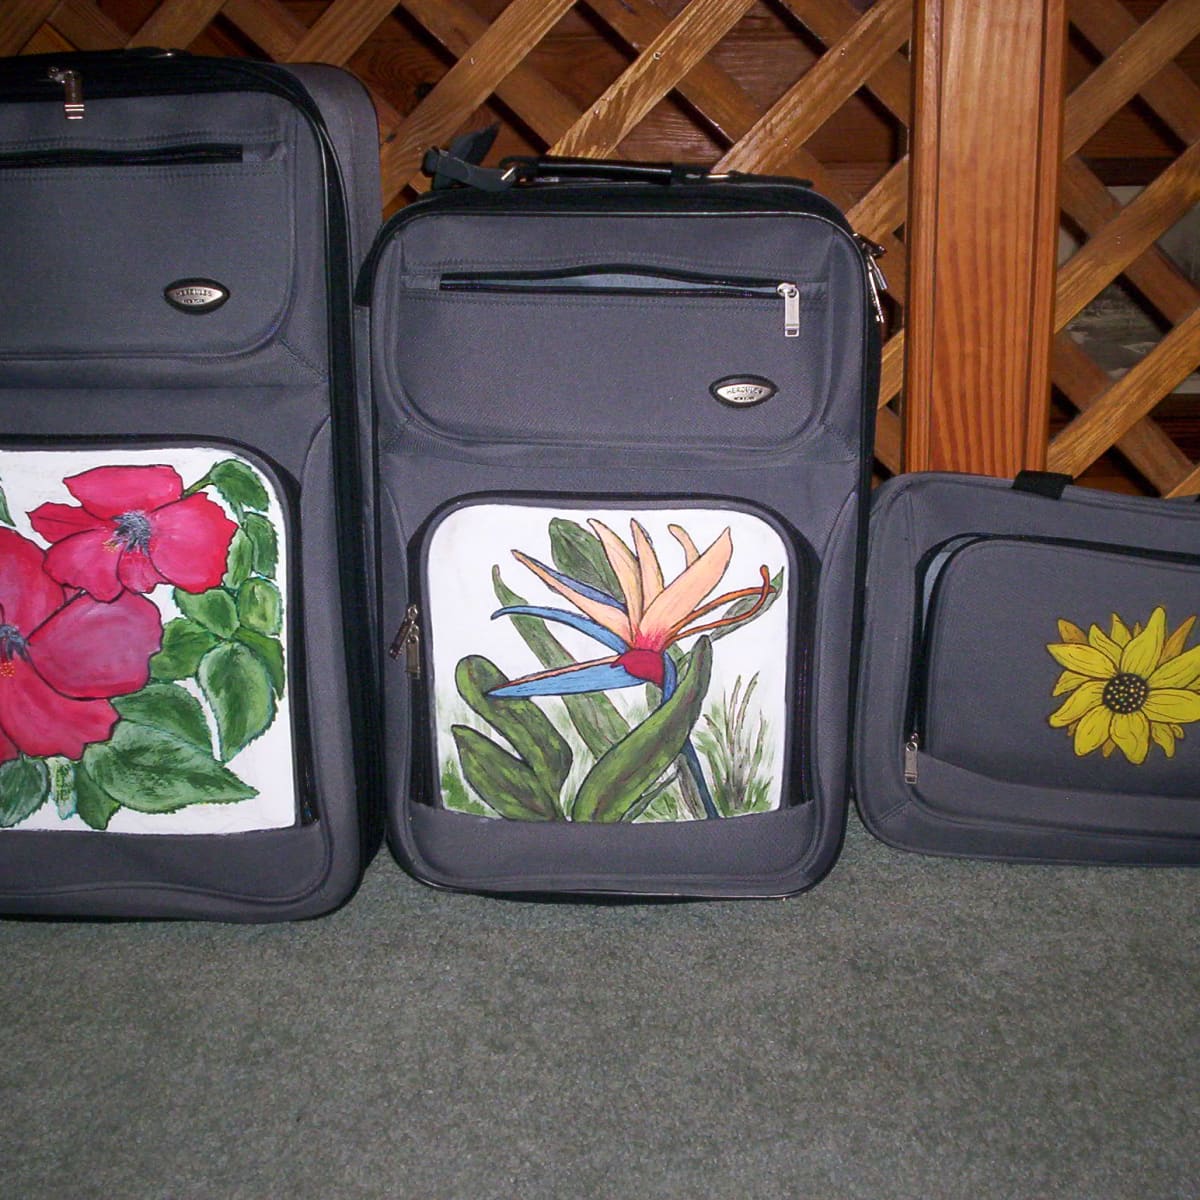 hand painted painted suitcases